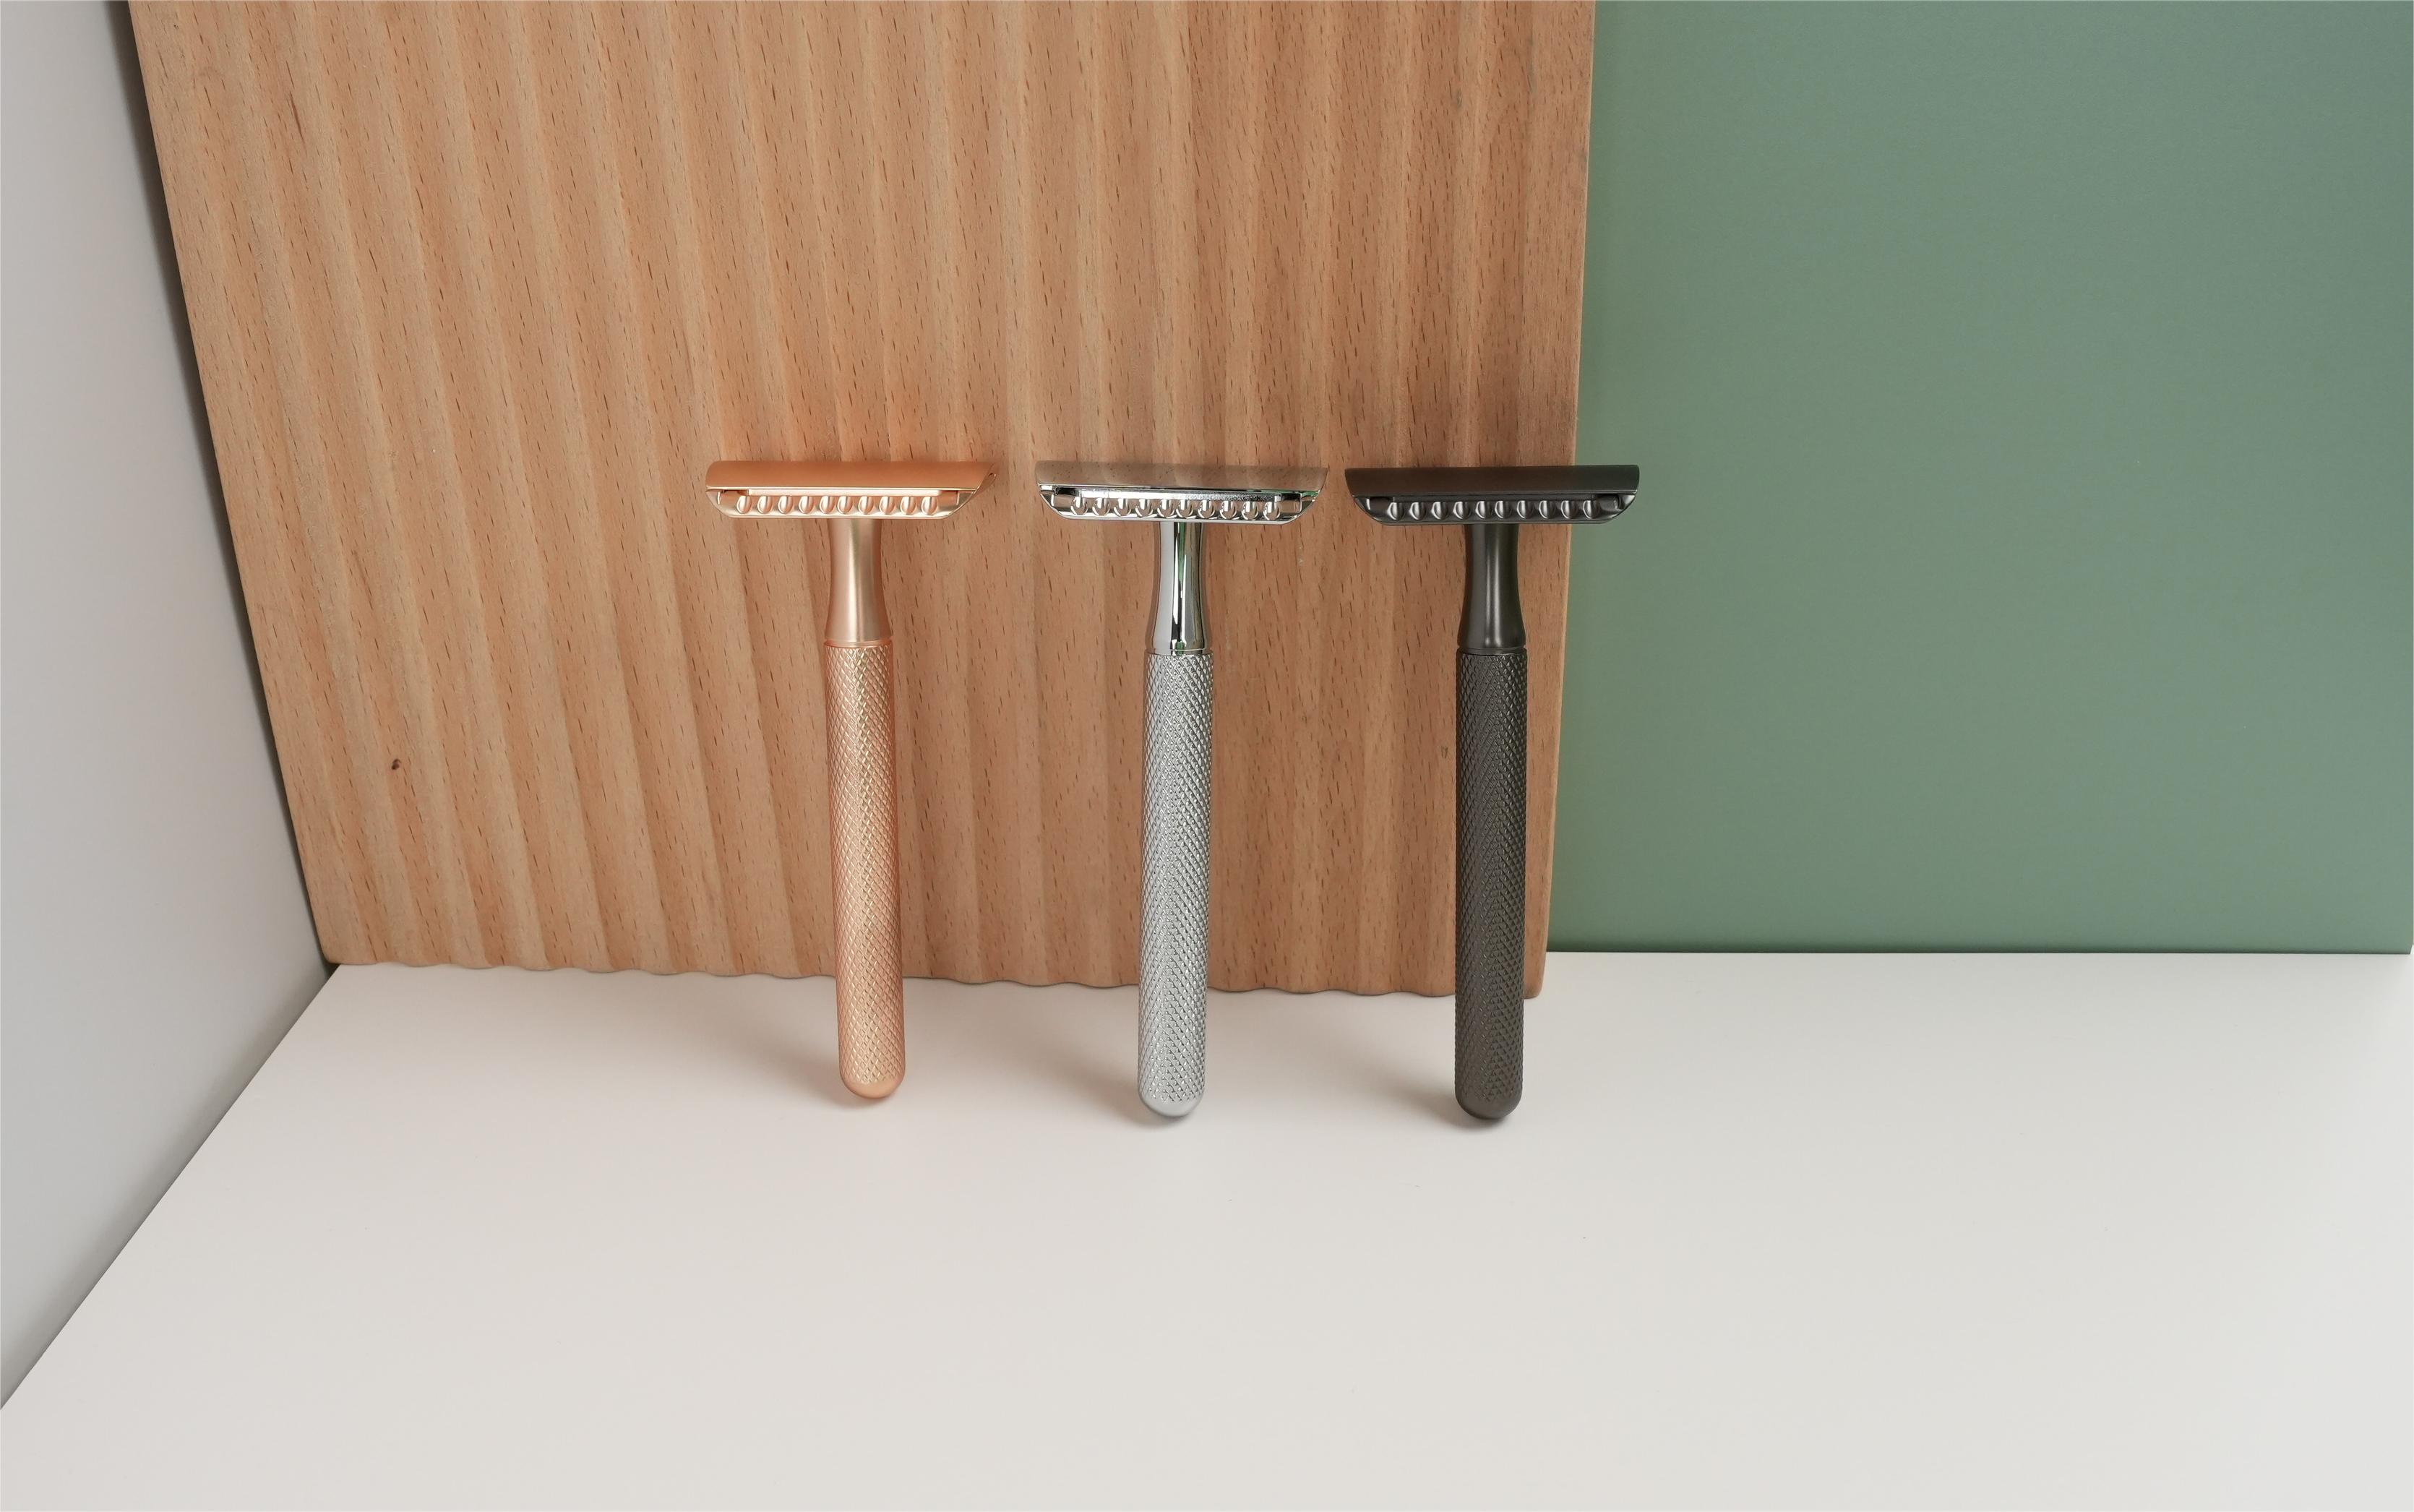 Safety Razor for Facial and Body Hair Removal